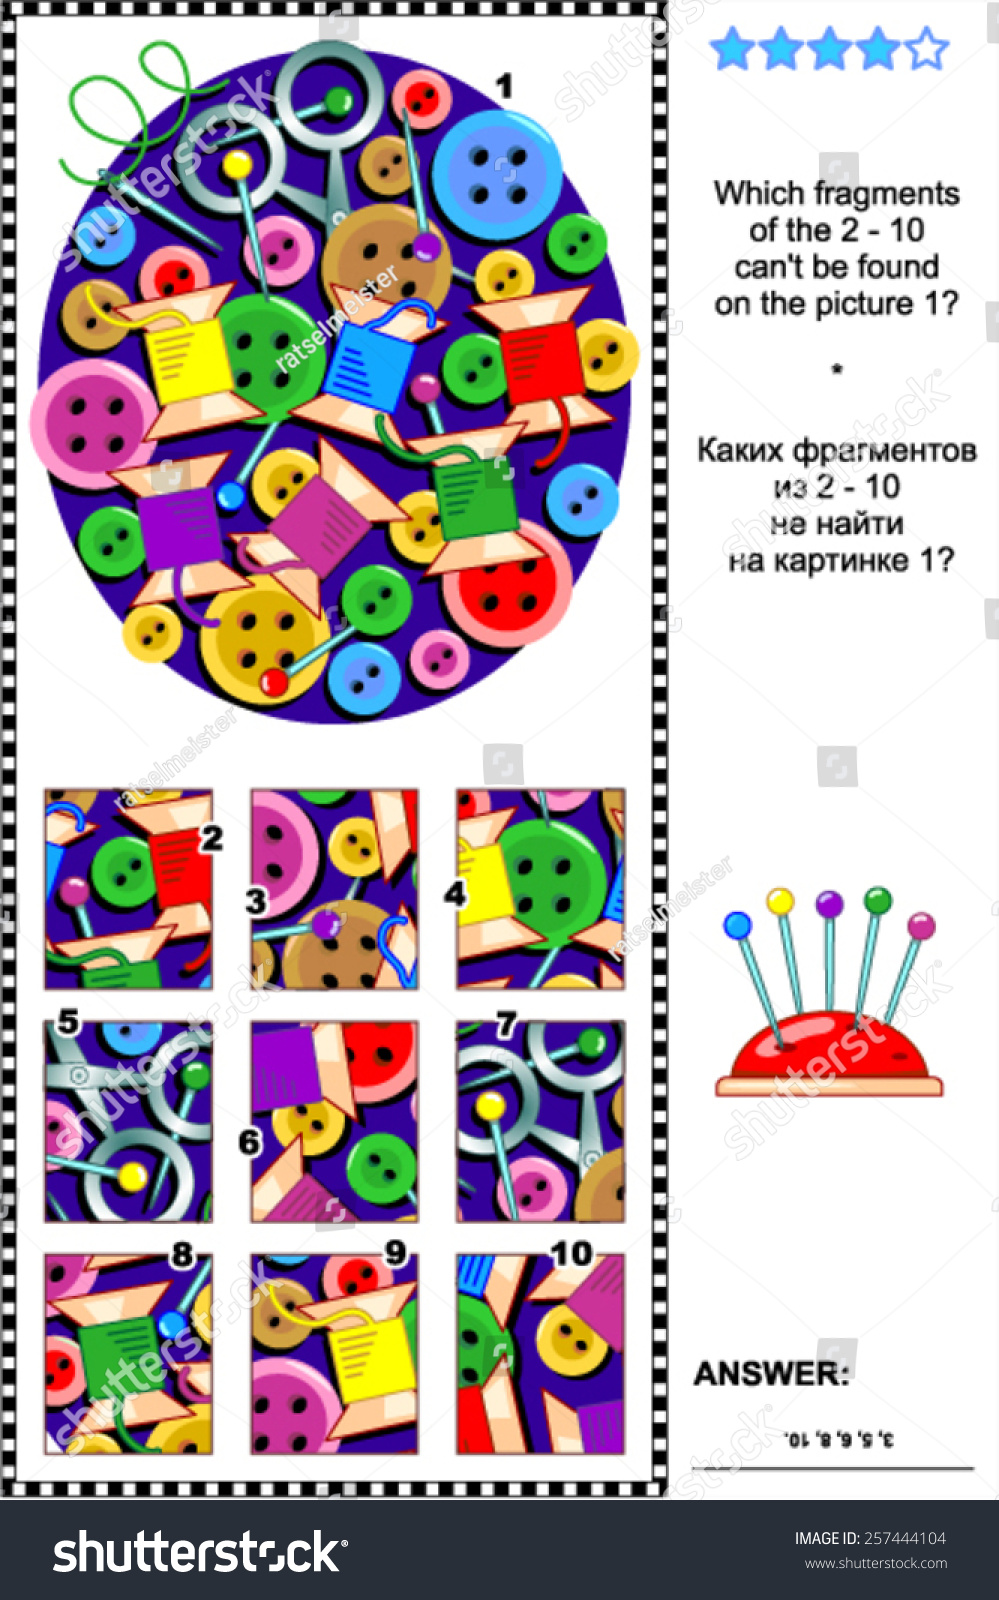 Needlecraft Items Visual Logic Puzzle What Of The 2 10